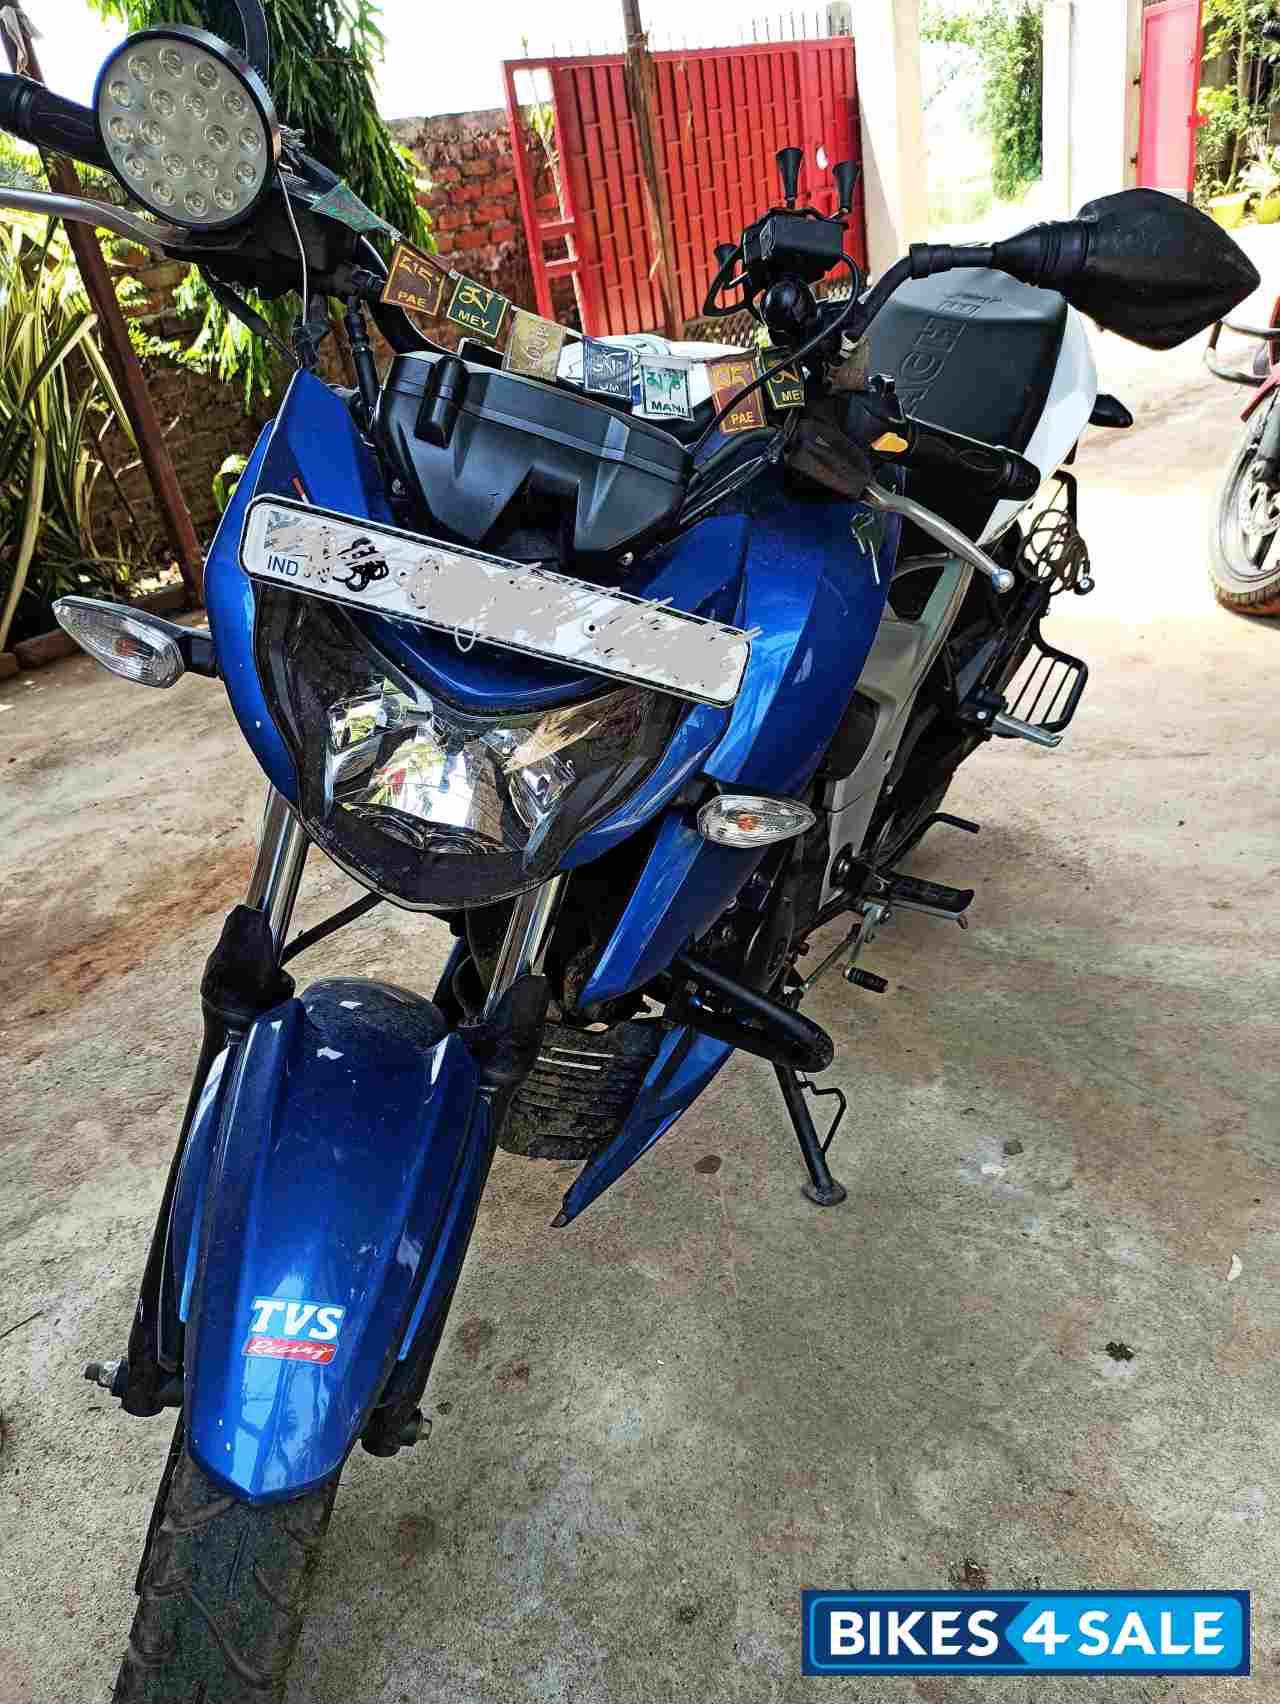 Used 18 Model Tvs Apache Rtr 160 4v For Sale In Guwahati Id Blue Colour Bikes4sale